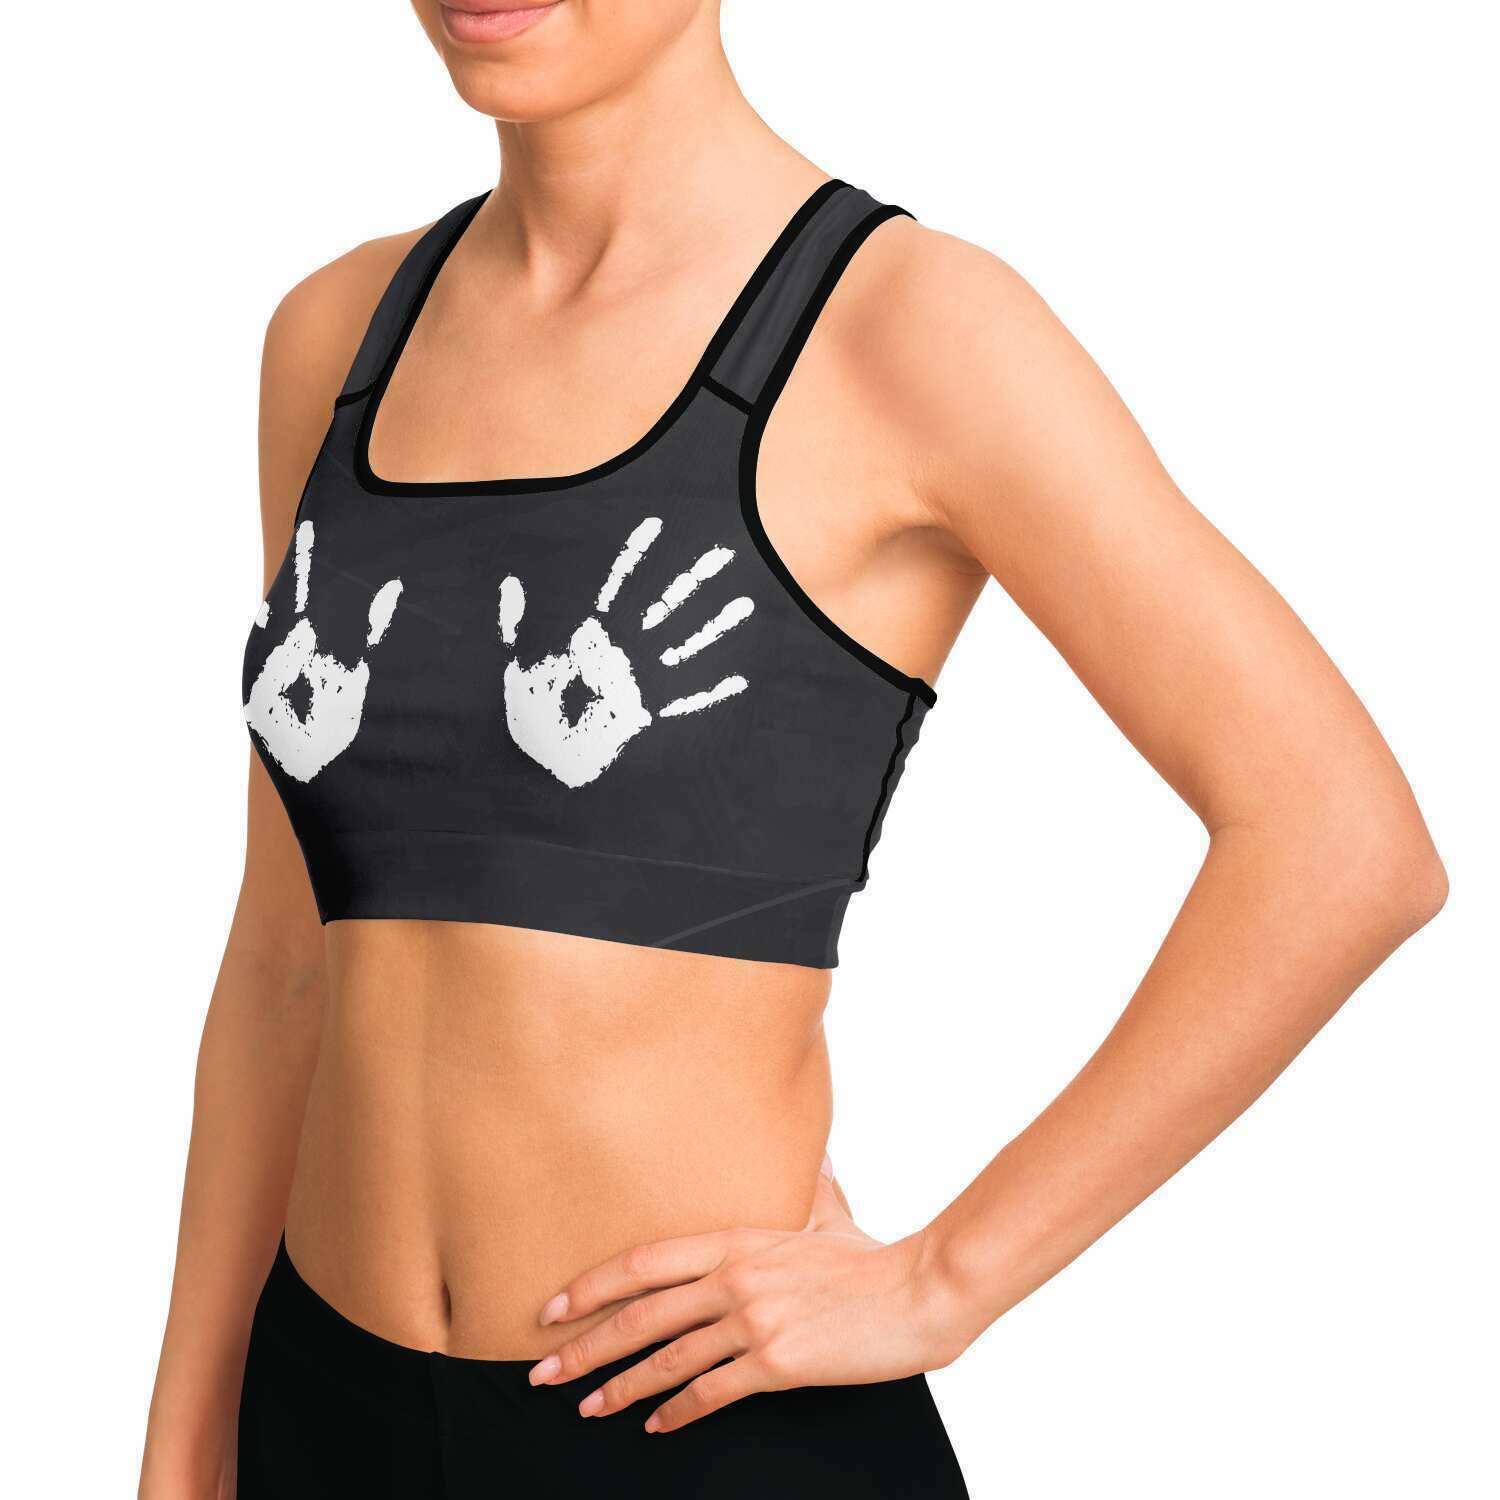 Women's Chalk Dirty To Me Hands Athletic Sports Bra Model Left